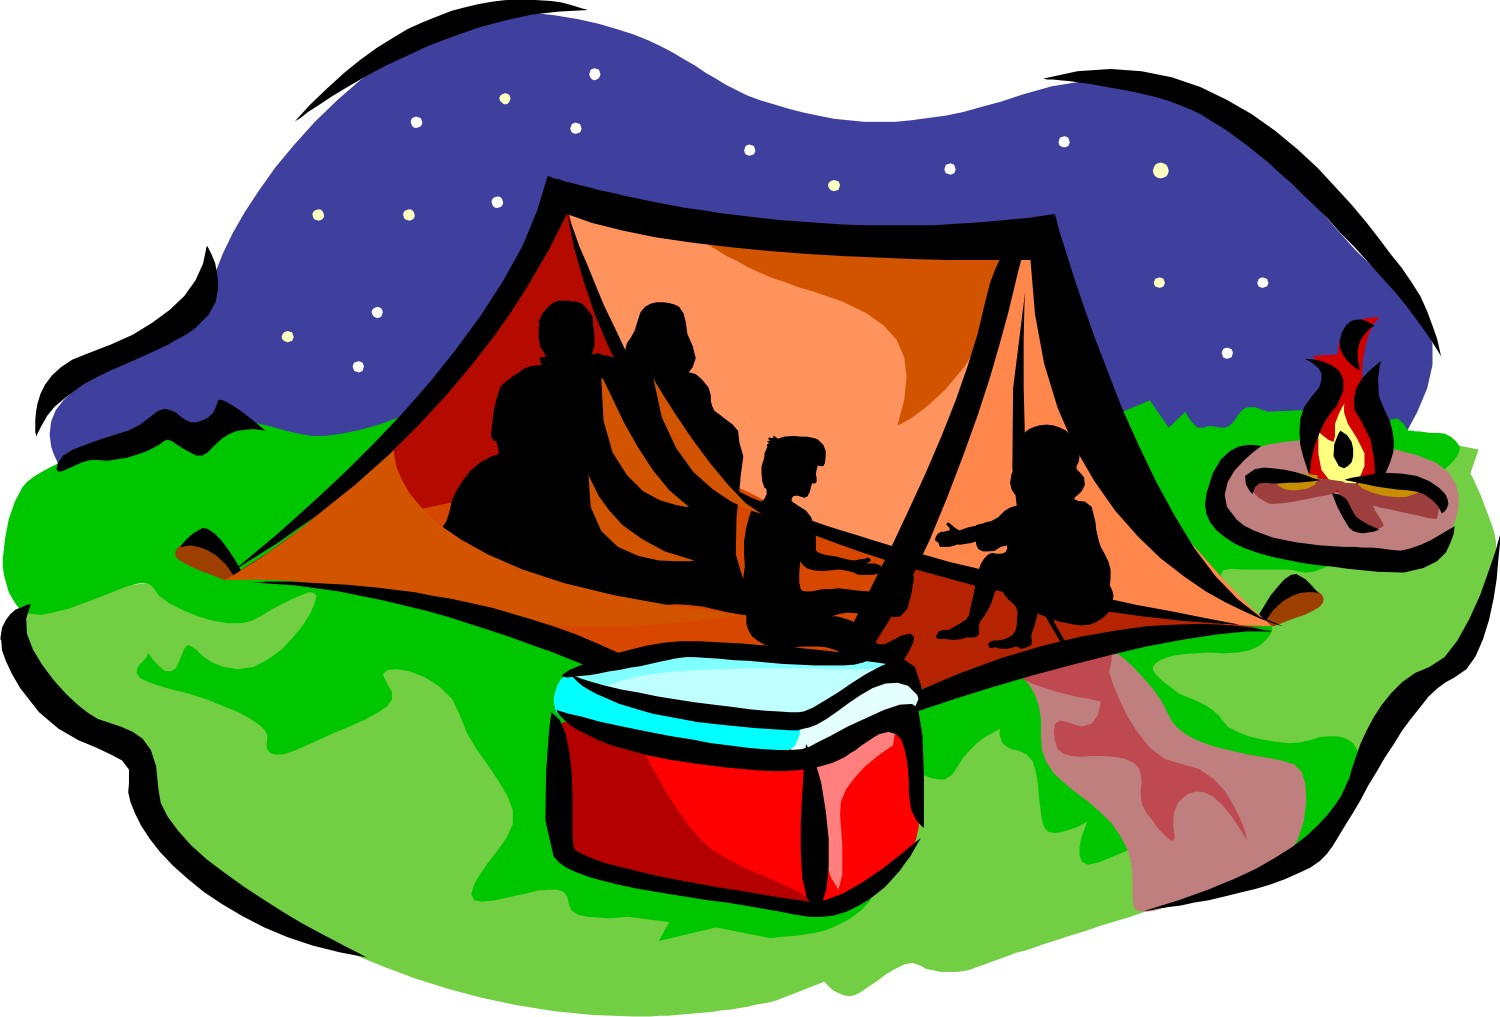 Images Of Cartoon Tents - ClipArt Best